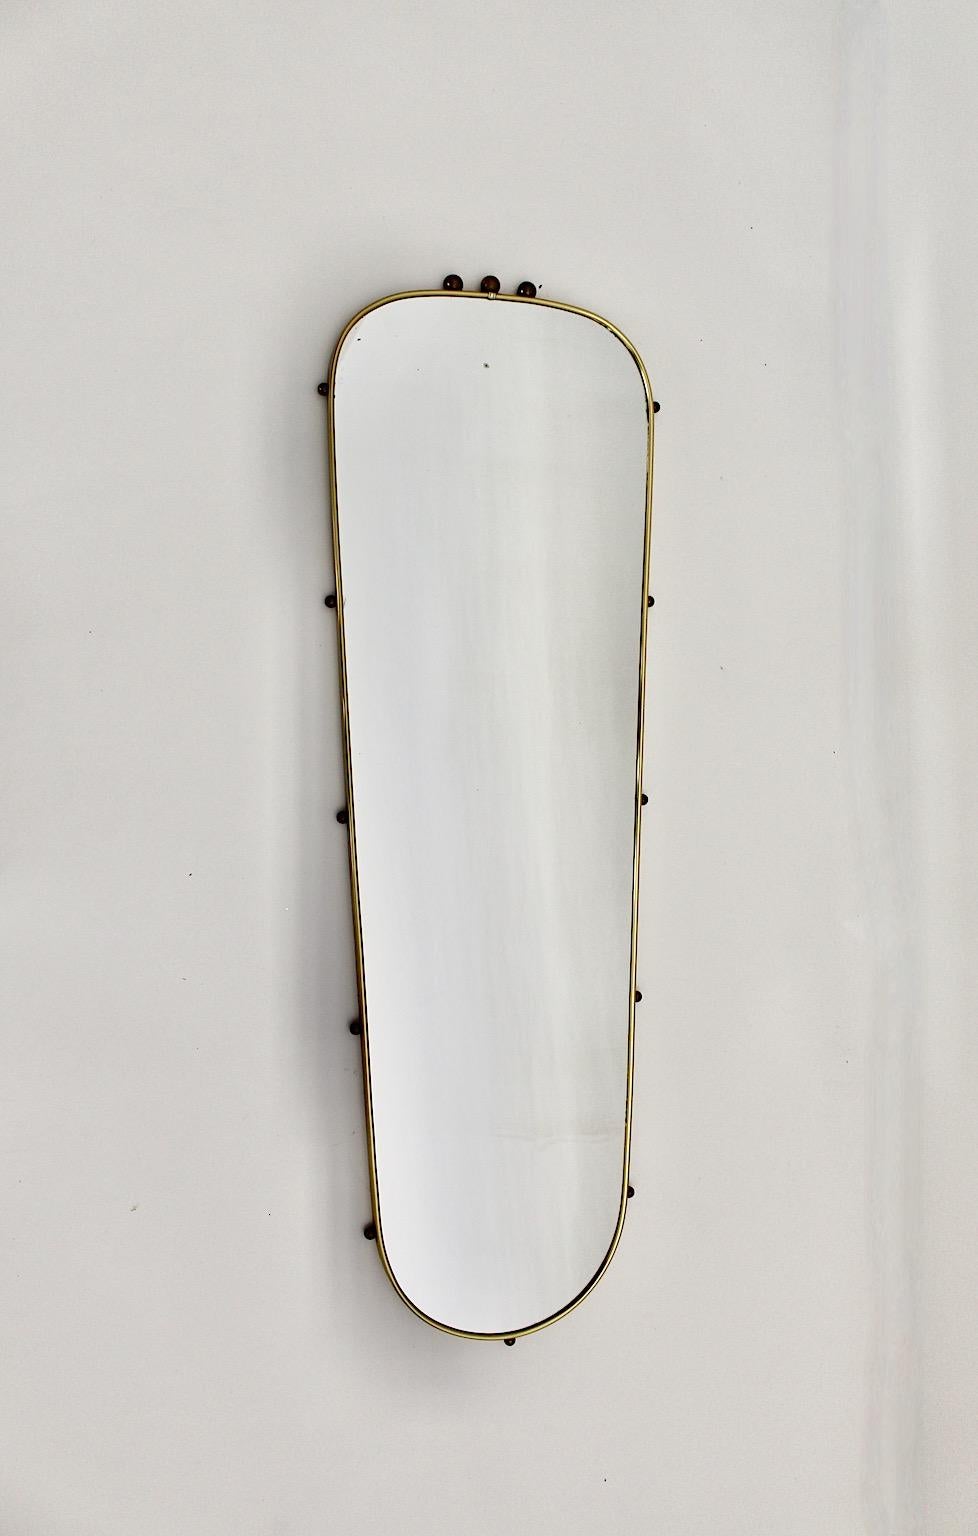 Mid Century Modern vintage oval form wall mirror or full length mirror from brass and mirror glass Italy 1960s.
Stunning vintage wall mirror with brass and spruce frame and ball like decor around the frame.
Good condition with minor signs of age